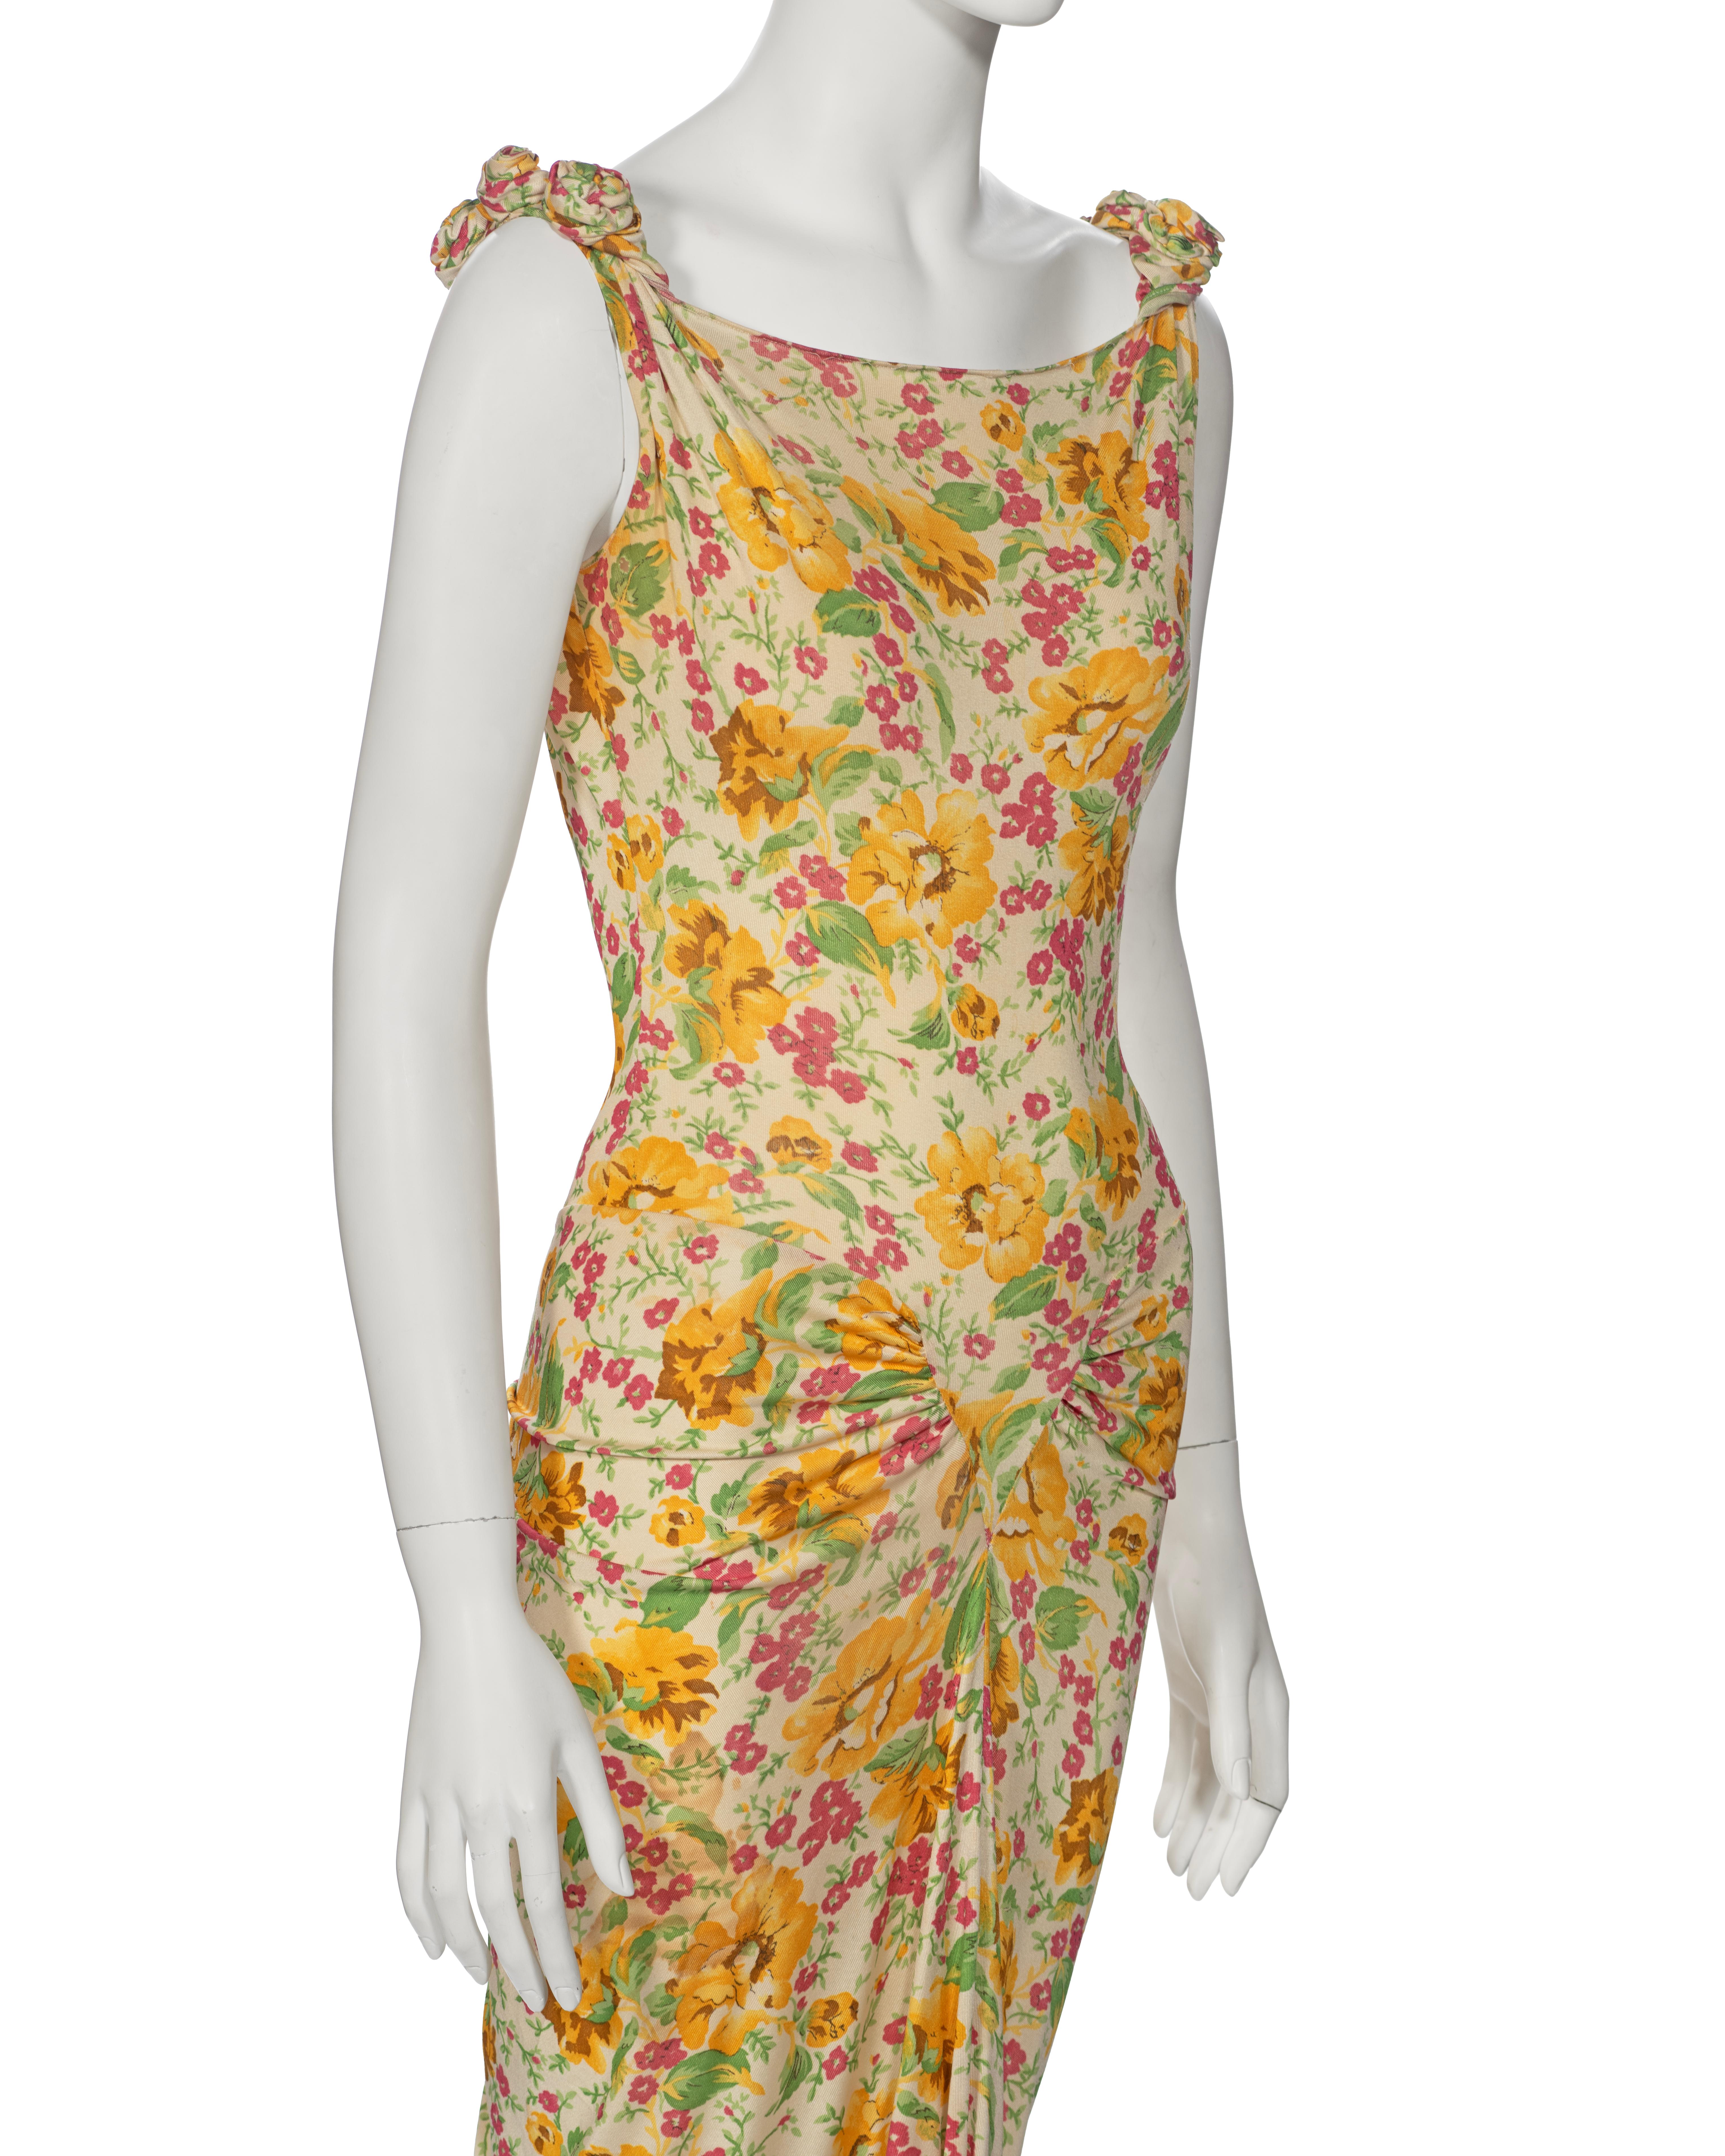 Christian Dior by John Galliano Floral Silk Jersey Cocktail Dress, ss 2000 2